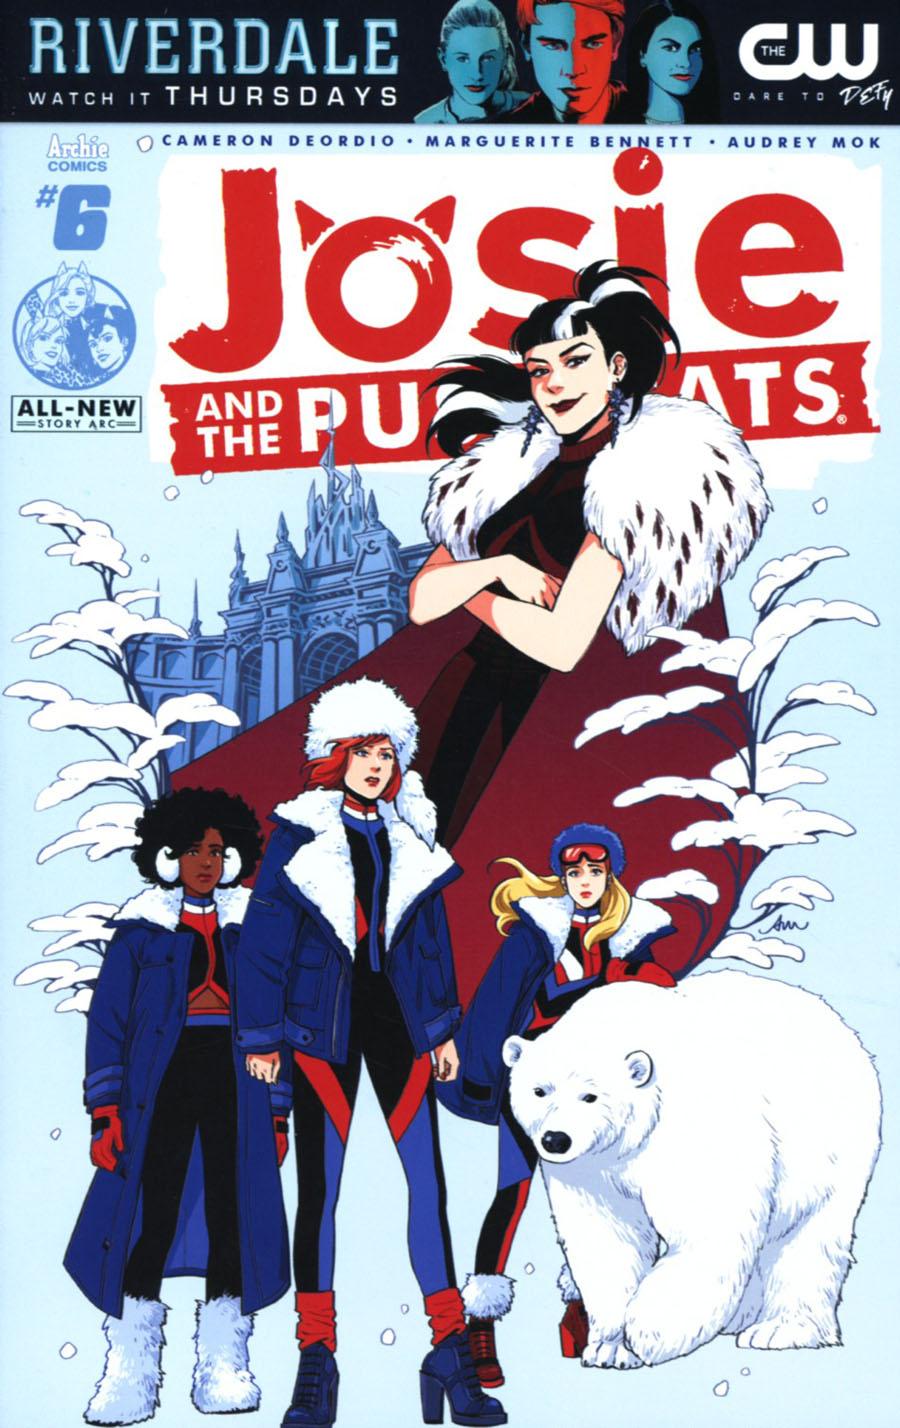 Josie And The Pussycats Vol. 2 #6